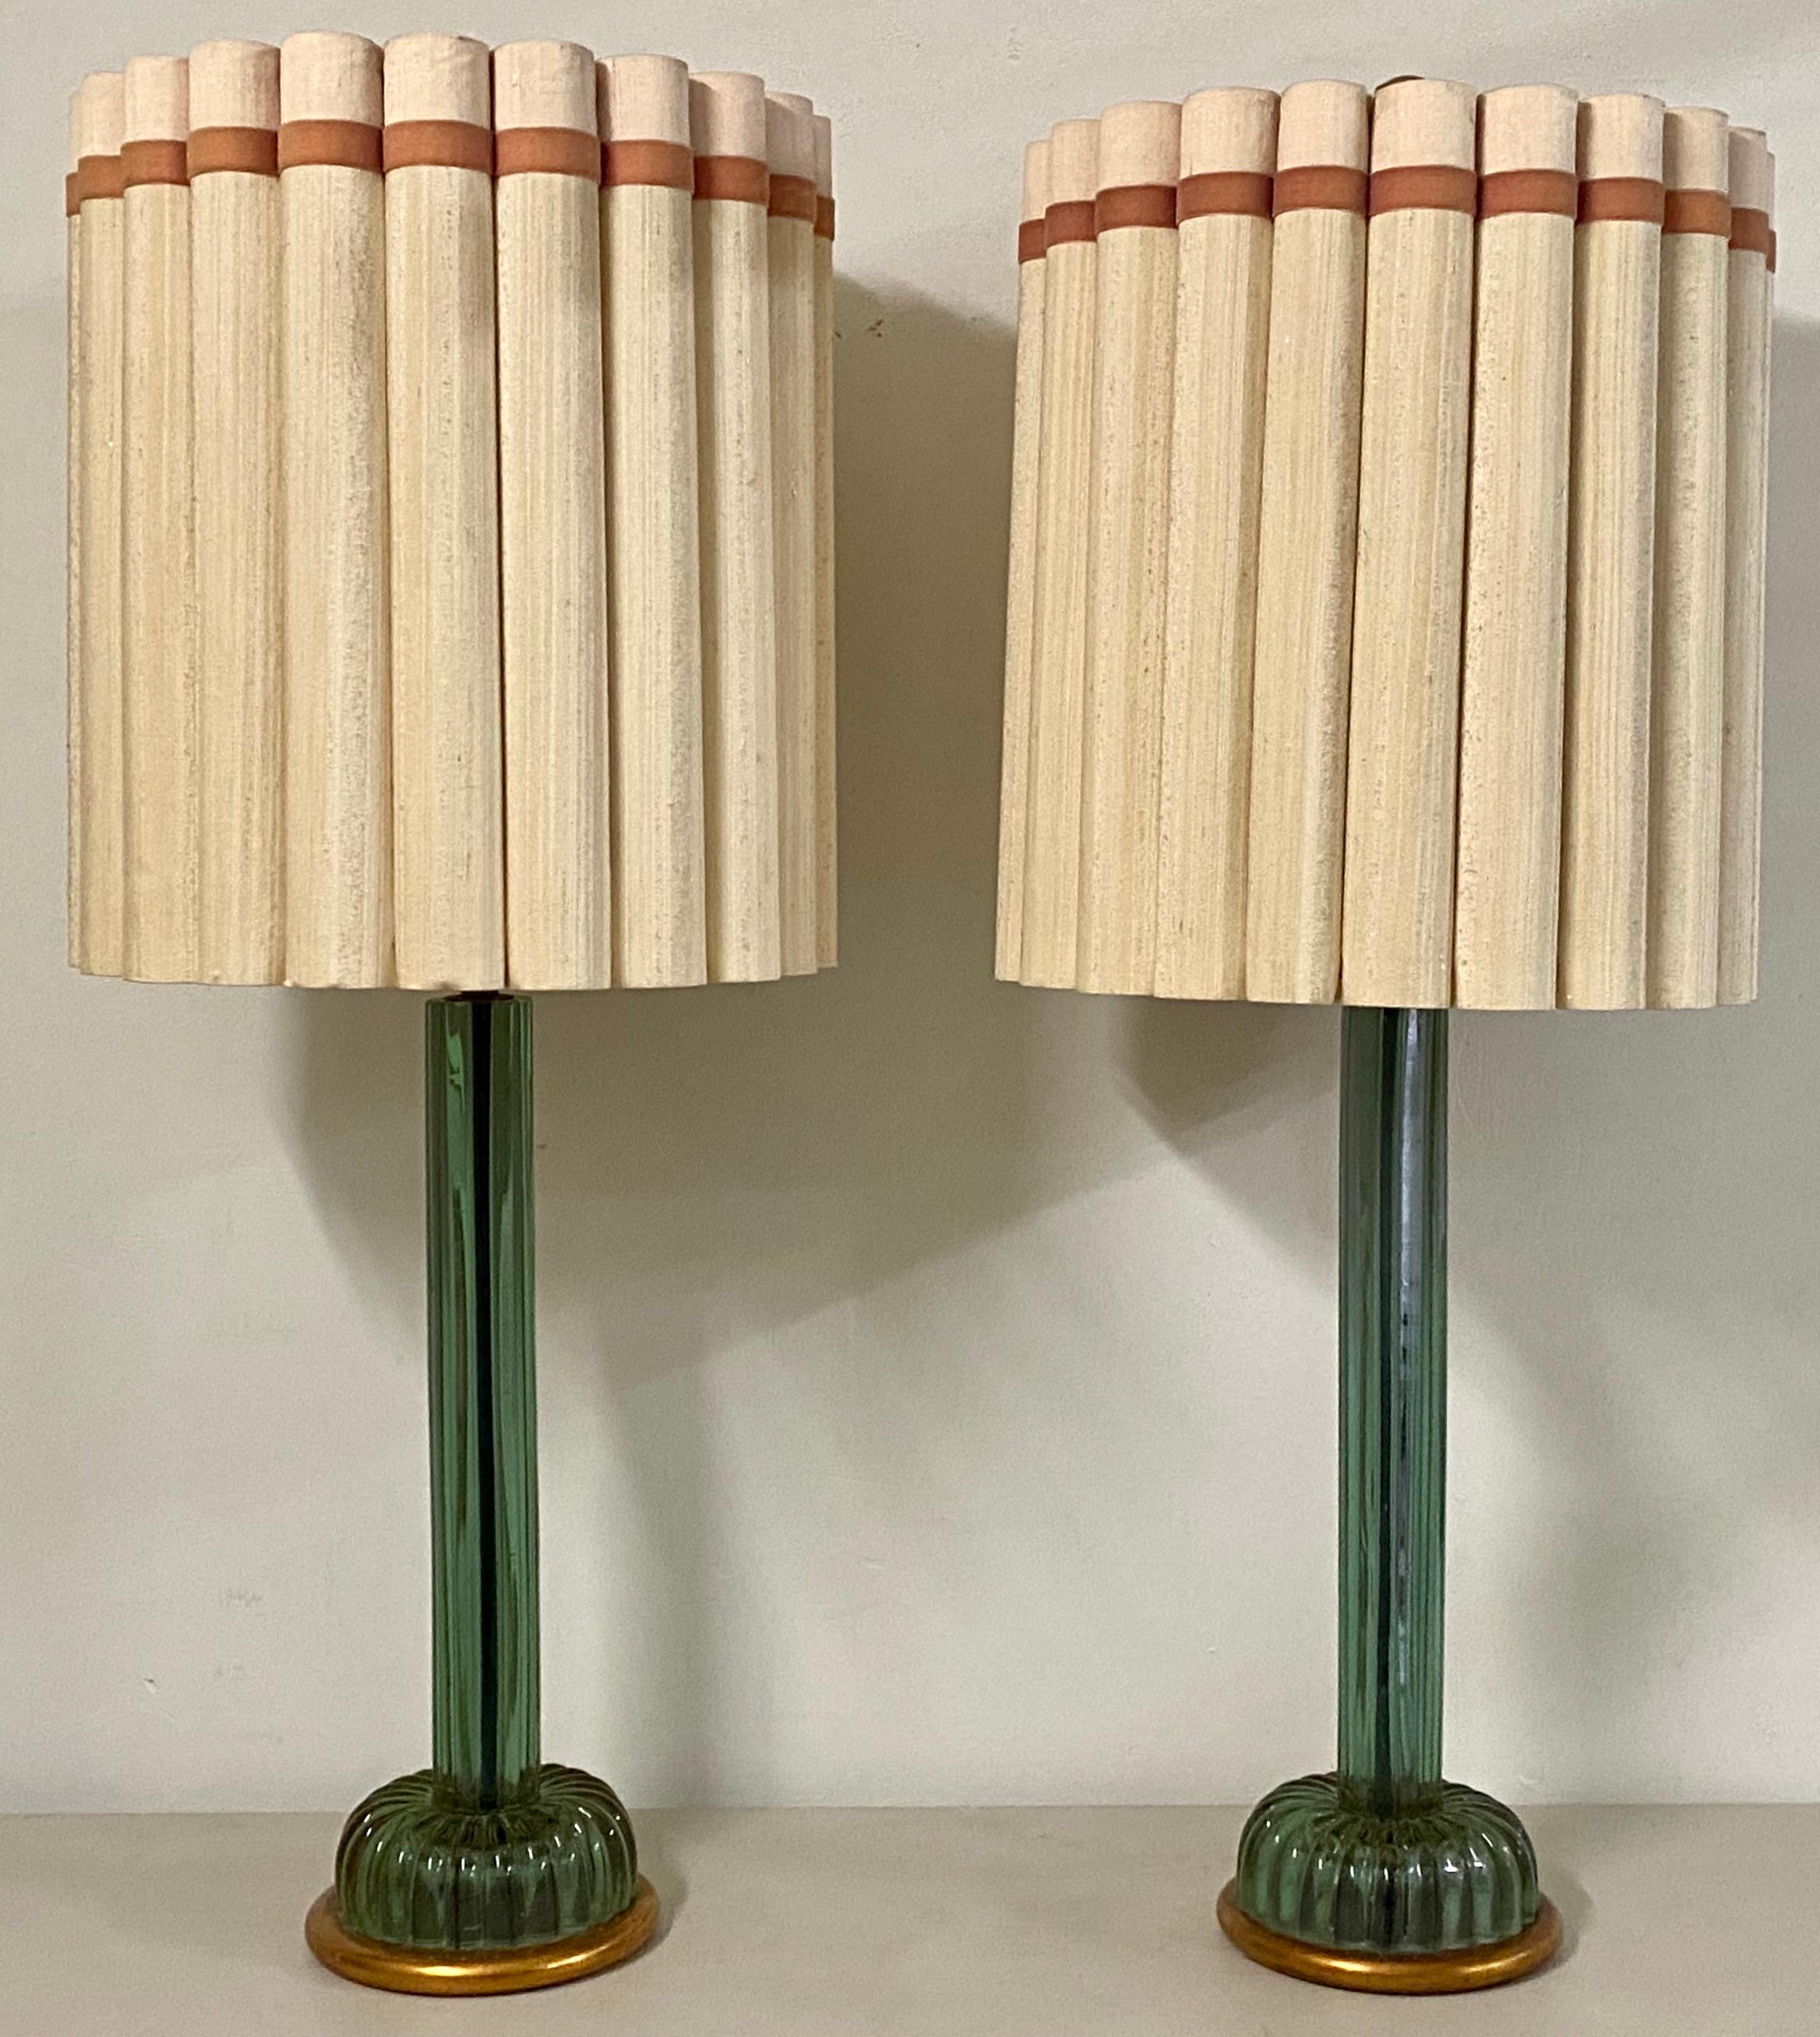 Pair of matching emerald green murano glass lamps by Marbro Lamp Company, circa 1950

The Marbro Lamp Company imported Murano glass from Italy to make their lamps

This is an outstanding tall and elegant pair of molded glass lamps. 

Each lamp